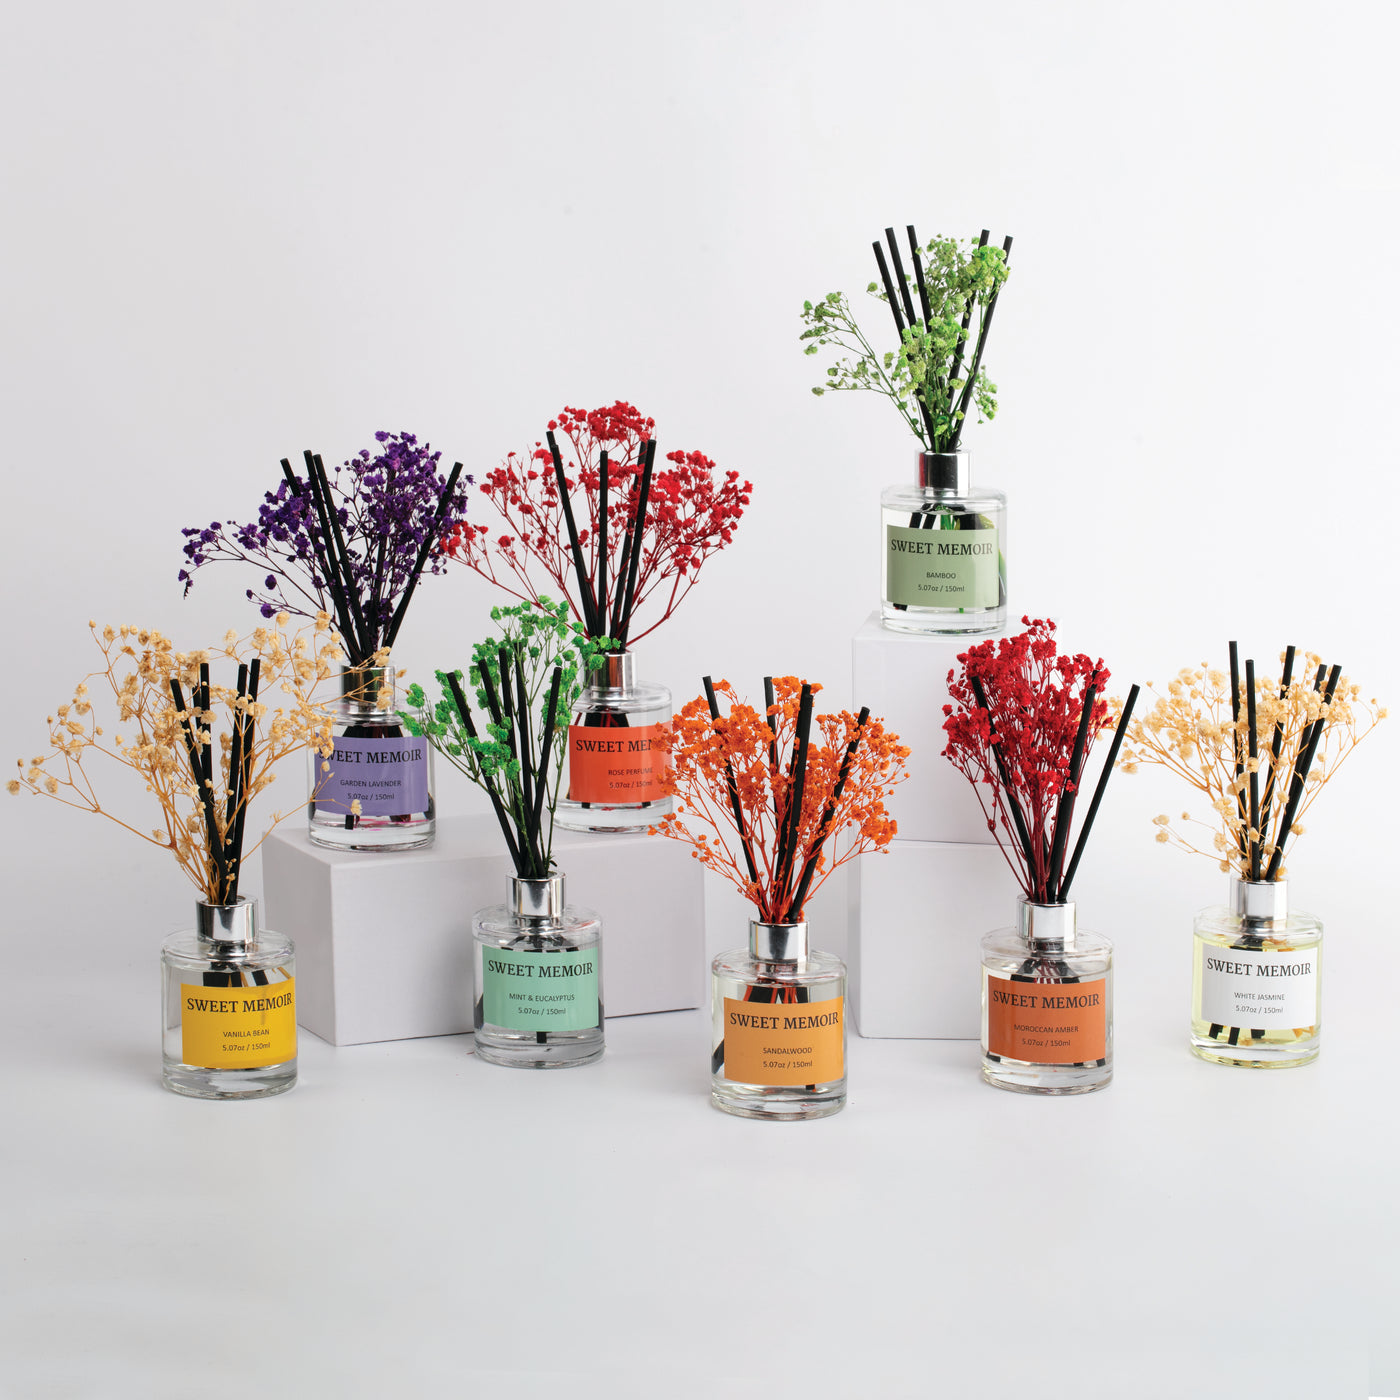 Colorful array of Sweet Memoir reed diffusers in various scents presented side by side for selection.